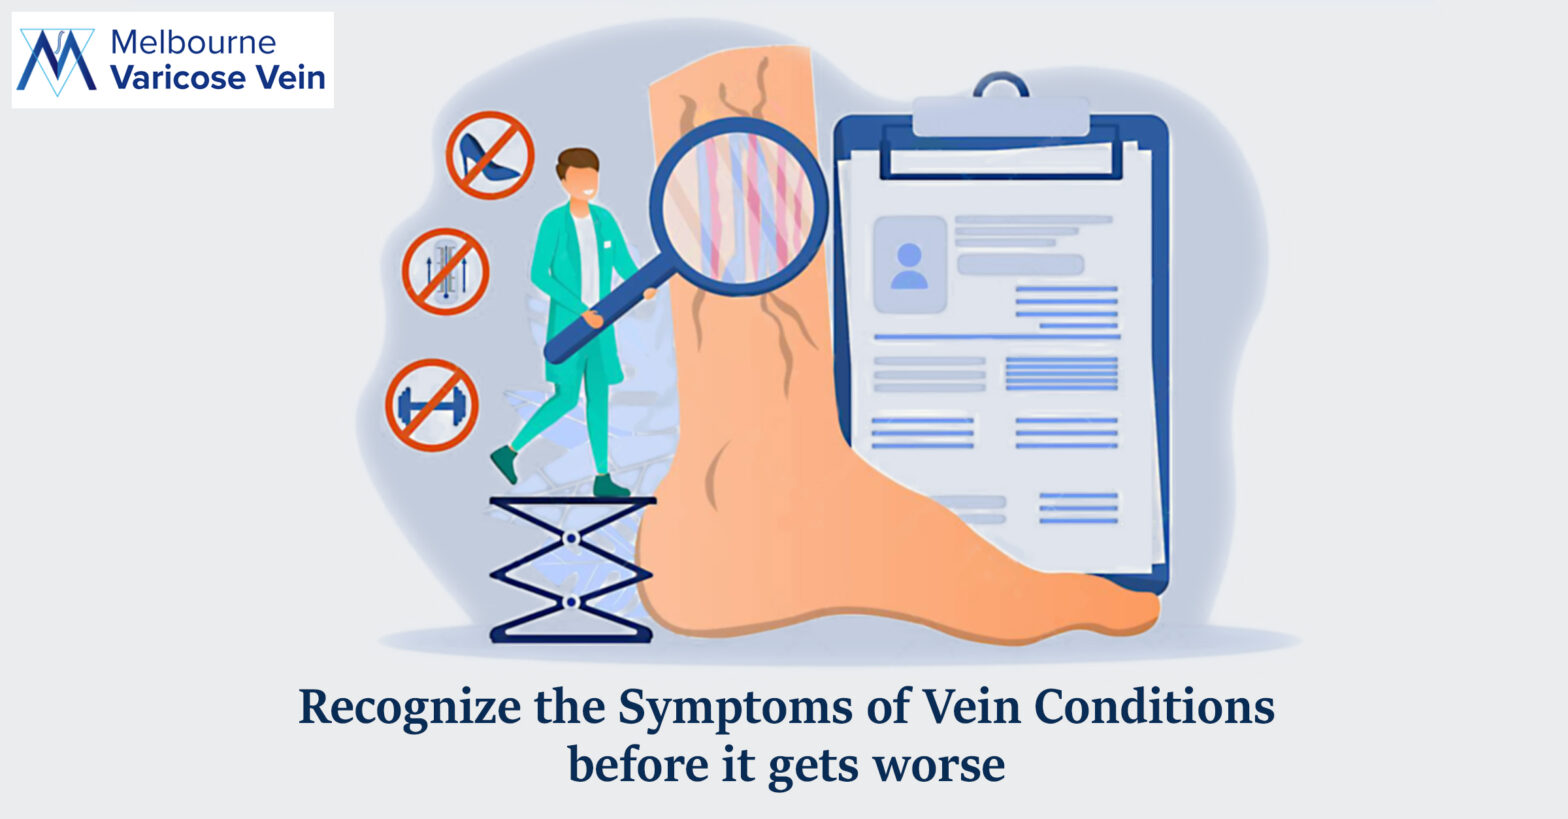 Recognize the symptoms of vein conditions before it gets worse - Best Vein Varicose Clinic in Victoria Melbourne